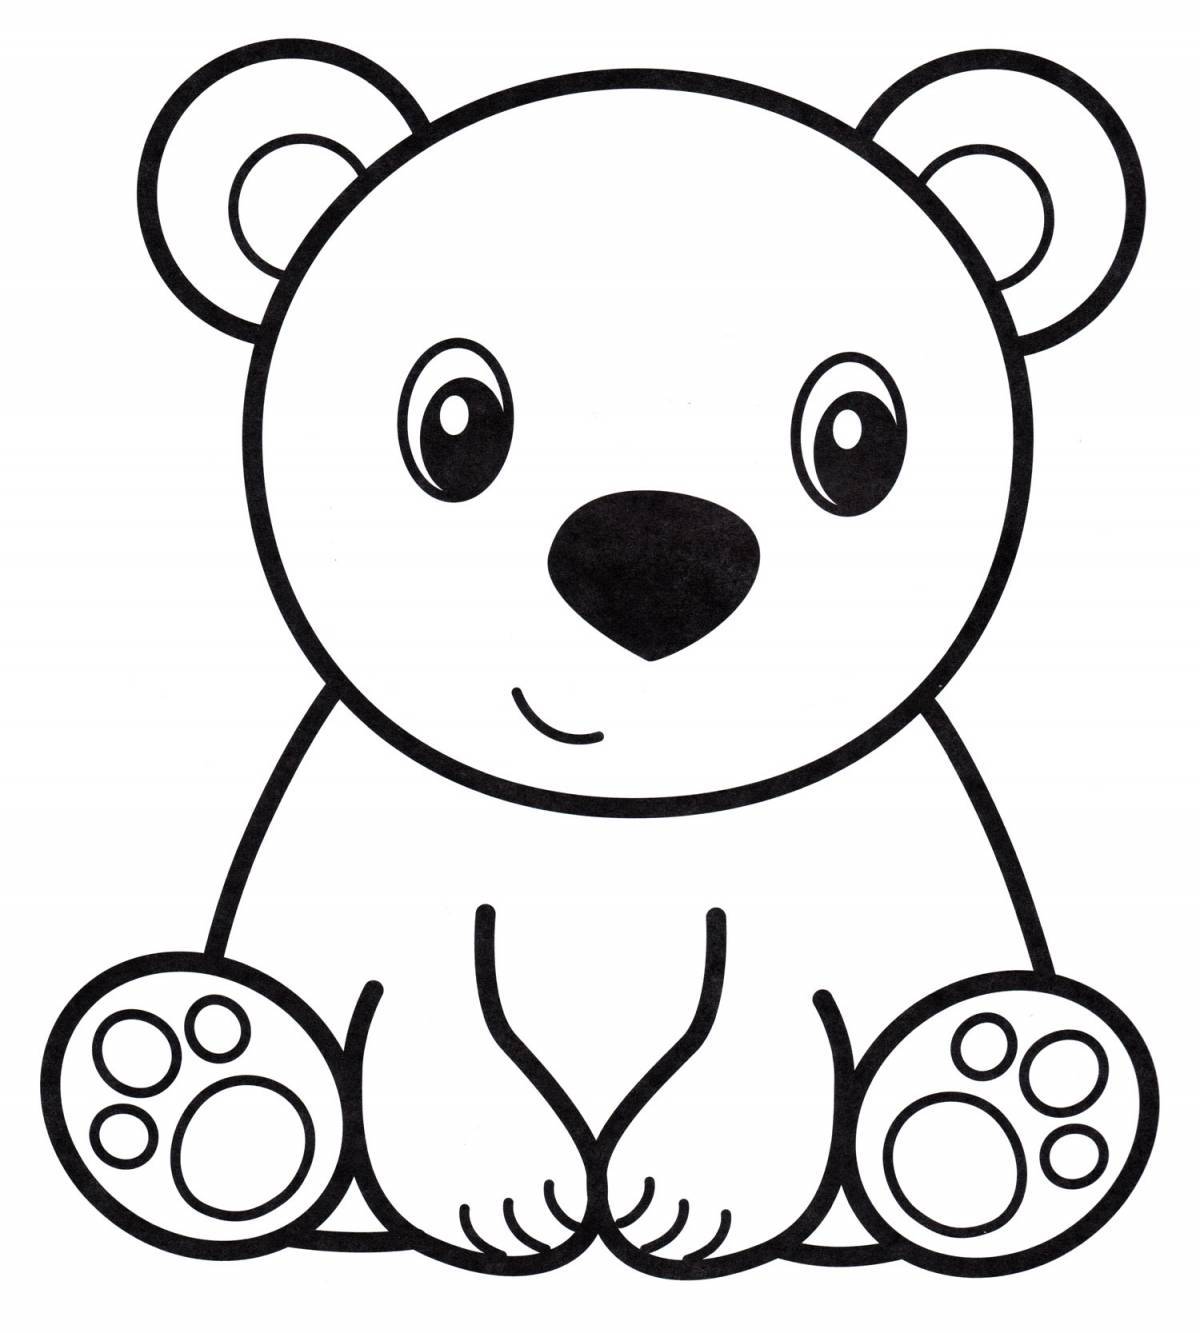 Color-frenzy coloring page bear for children 3-4 years old